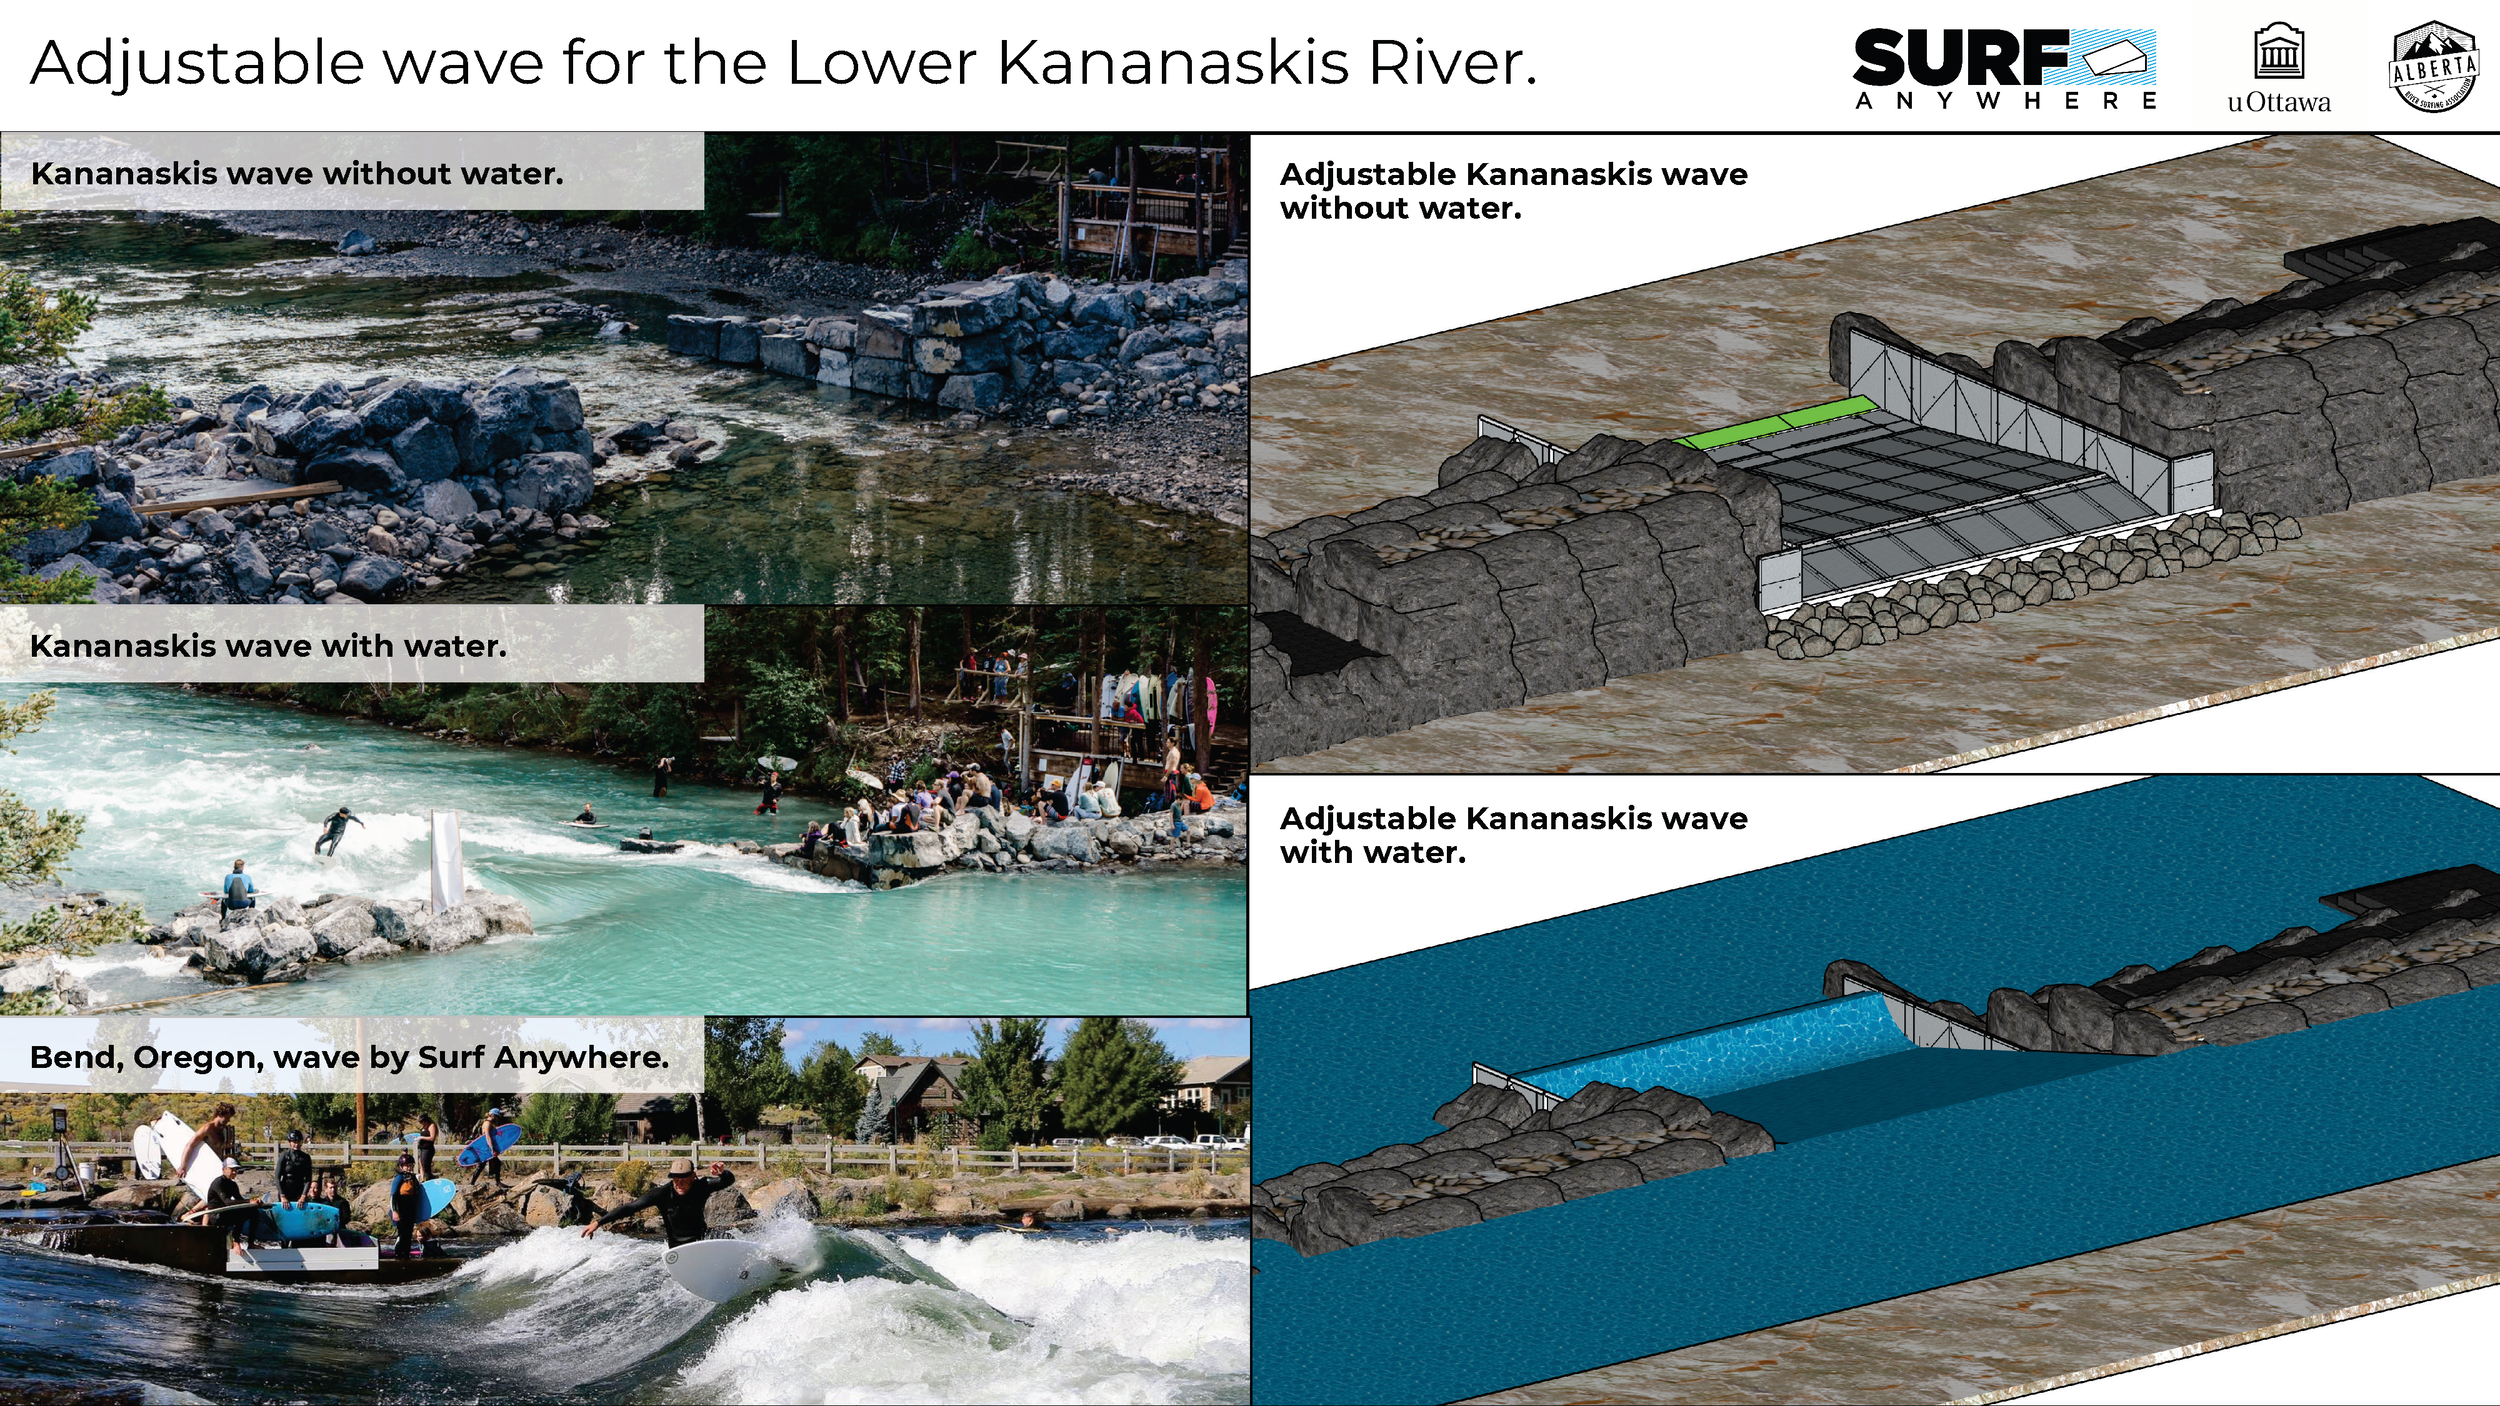 Alberta river wave parks overview_Page_4.png